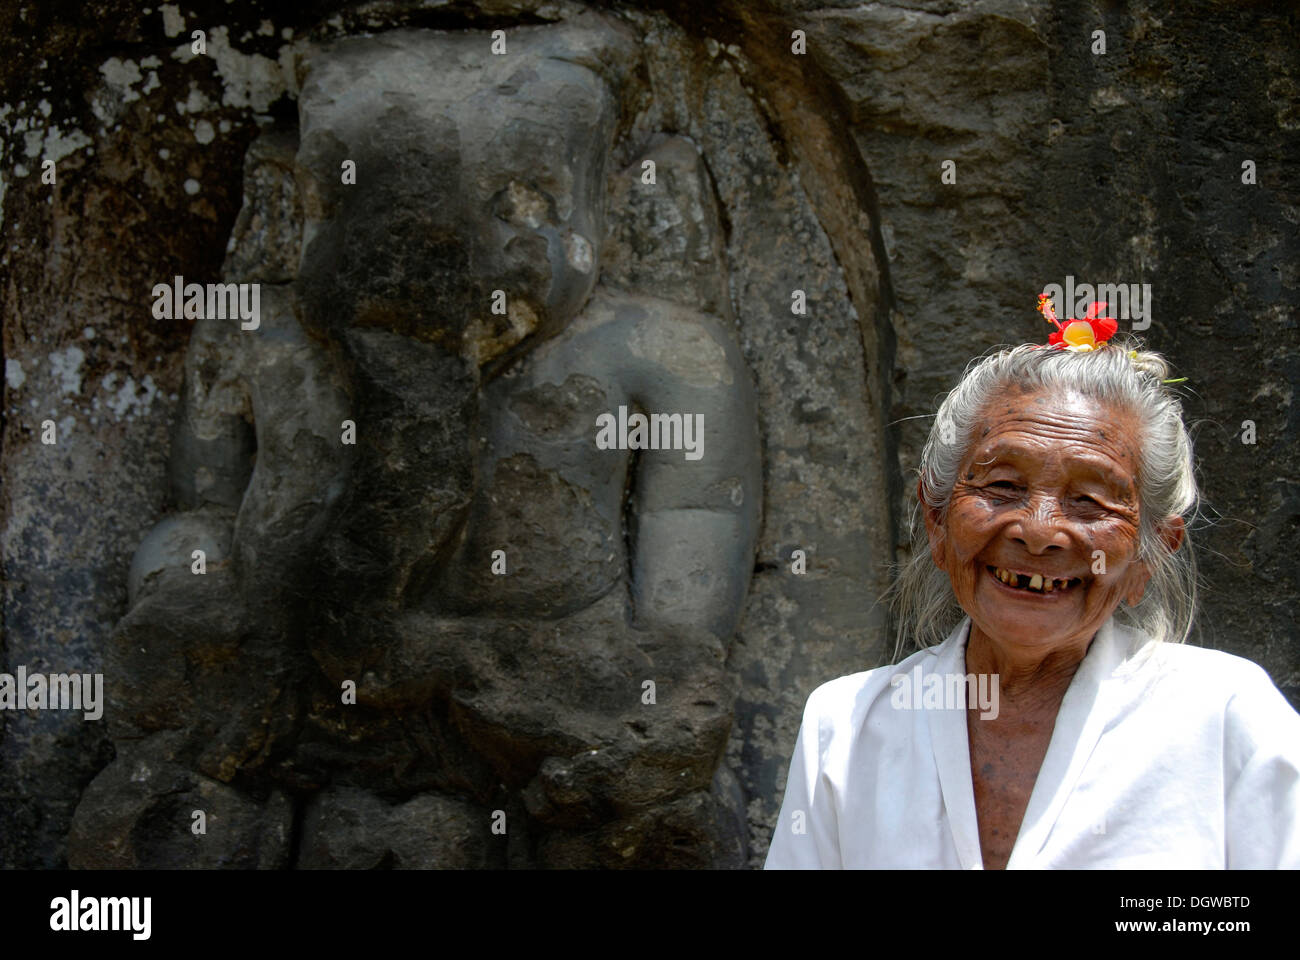 Bali Hinduism, portrait of an old Balinese woman with flower in her hear laughing in front of rock relief, God Ganesh or Ganesha Stock Photo